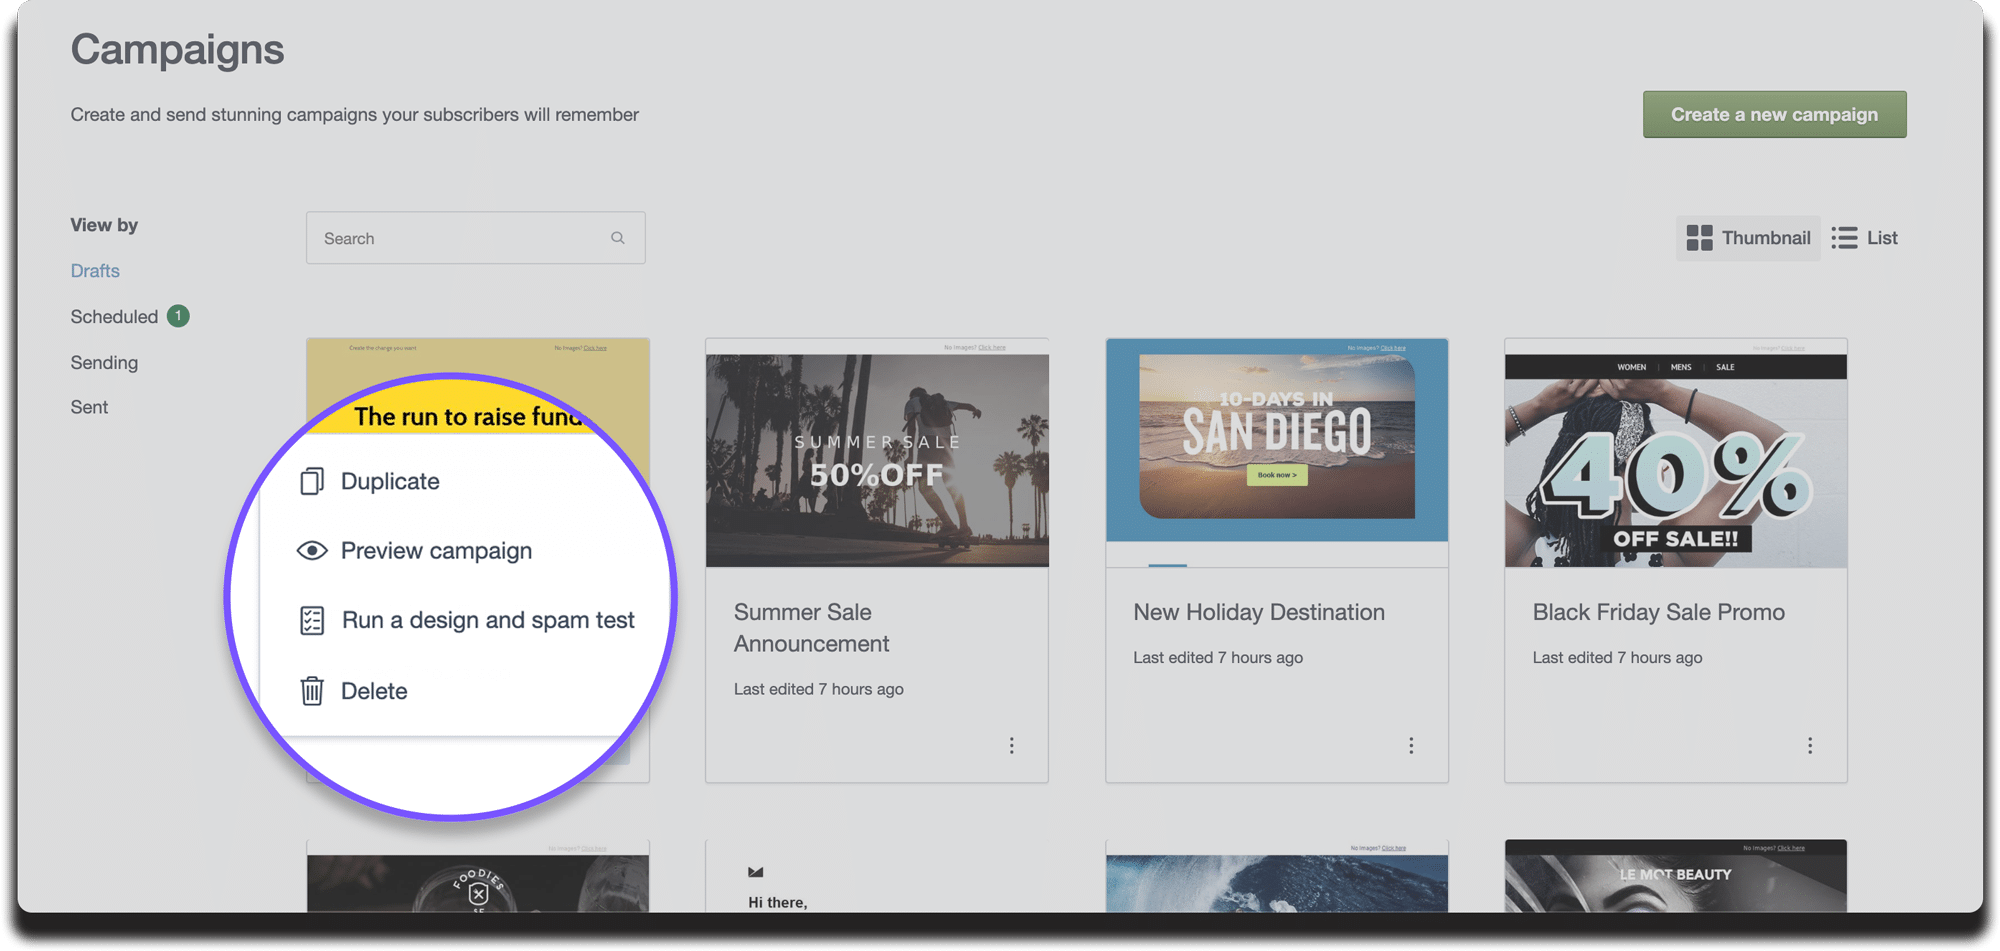 Showing the New campaign menu option for each thumbnail in the campaign page